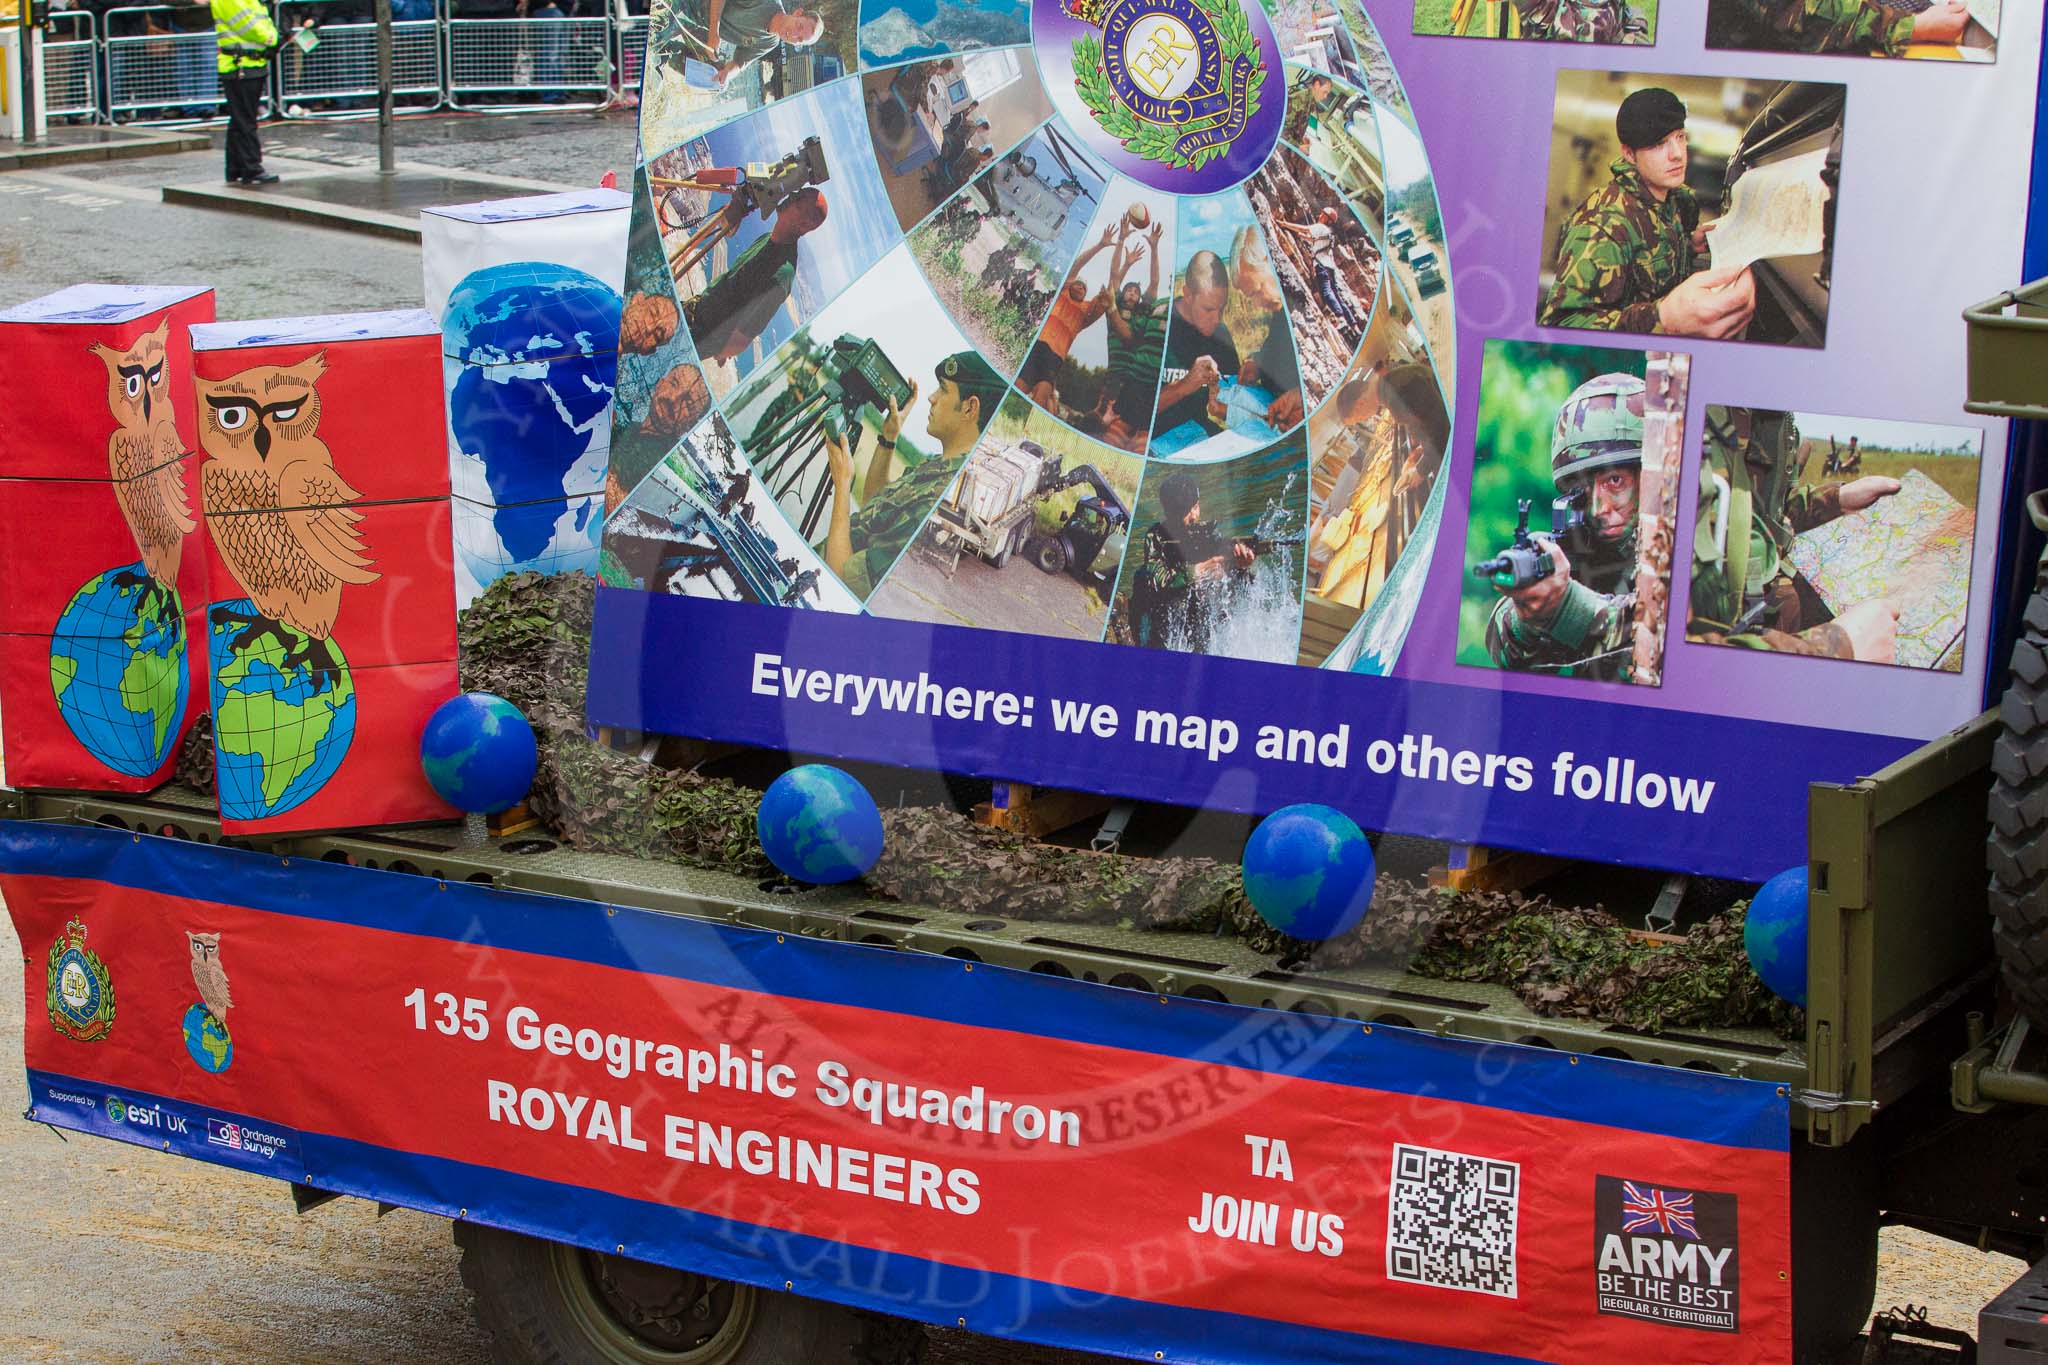 Lord Mayor's Show 2012: Entry 64 - 135 Independent Geographic Squadron RE (Volunteers)..
Press stand opposite Mansion House, City of London,
London,
Greater London,
United Kingdom,
on 10 November 2012 at 11:29, image #833